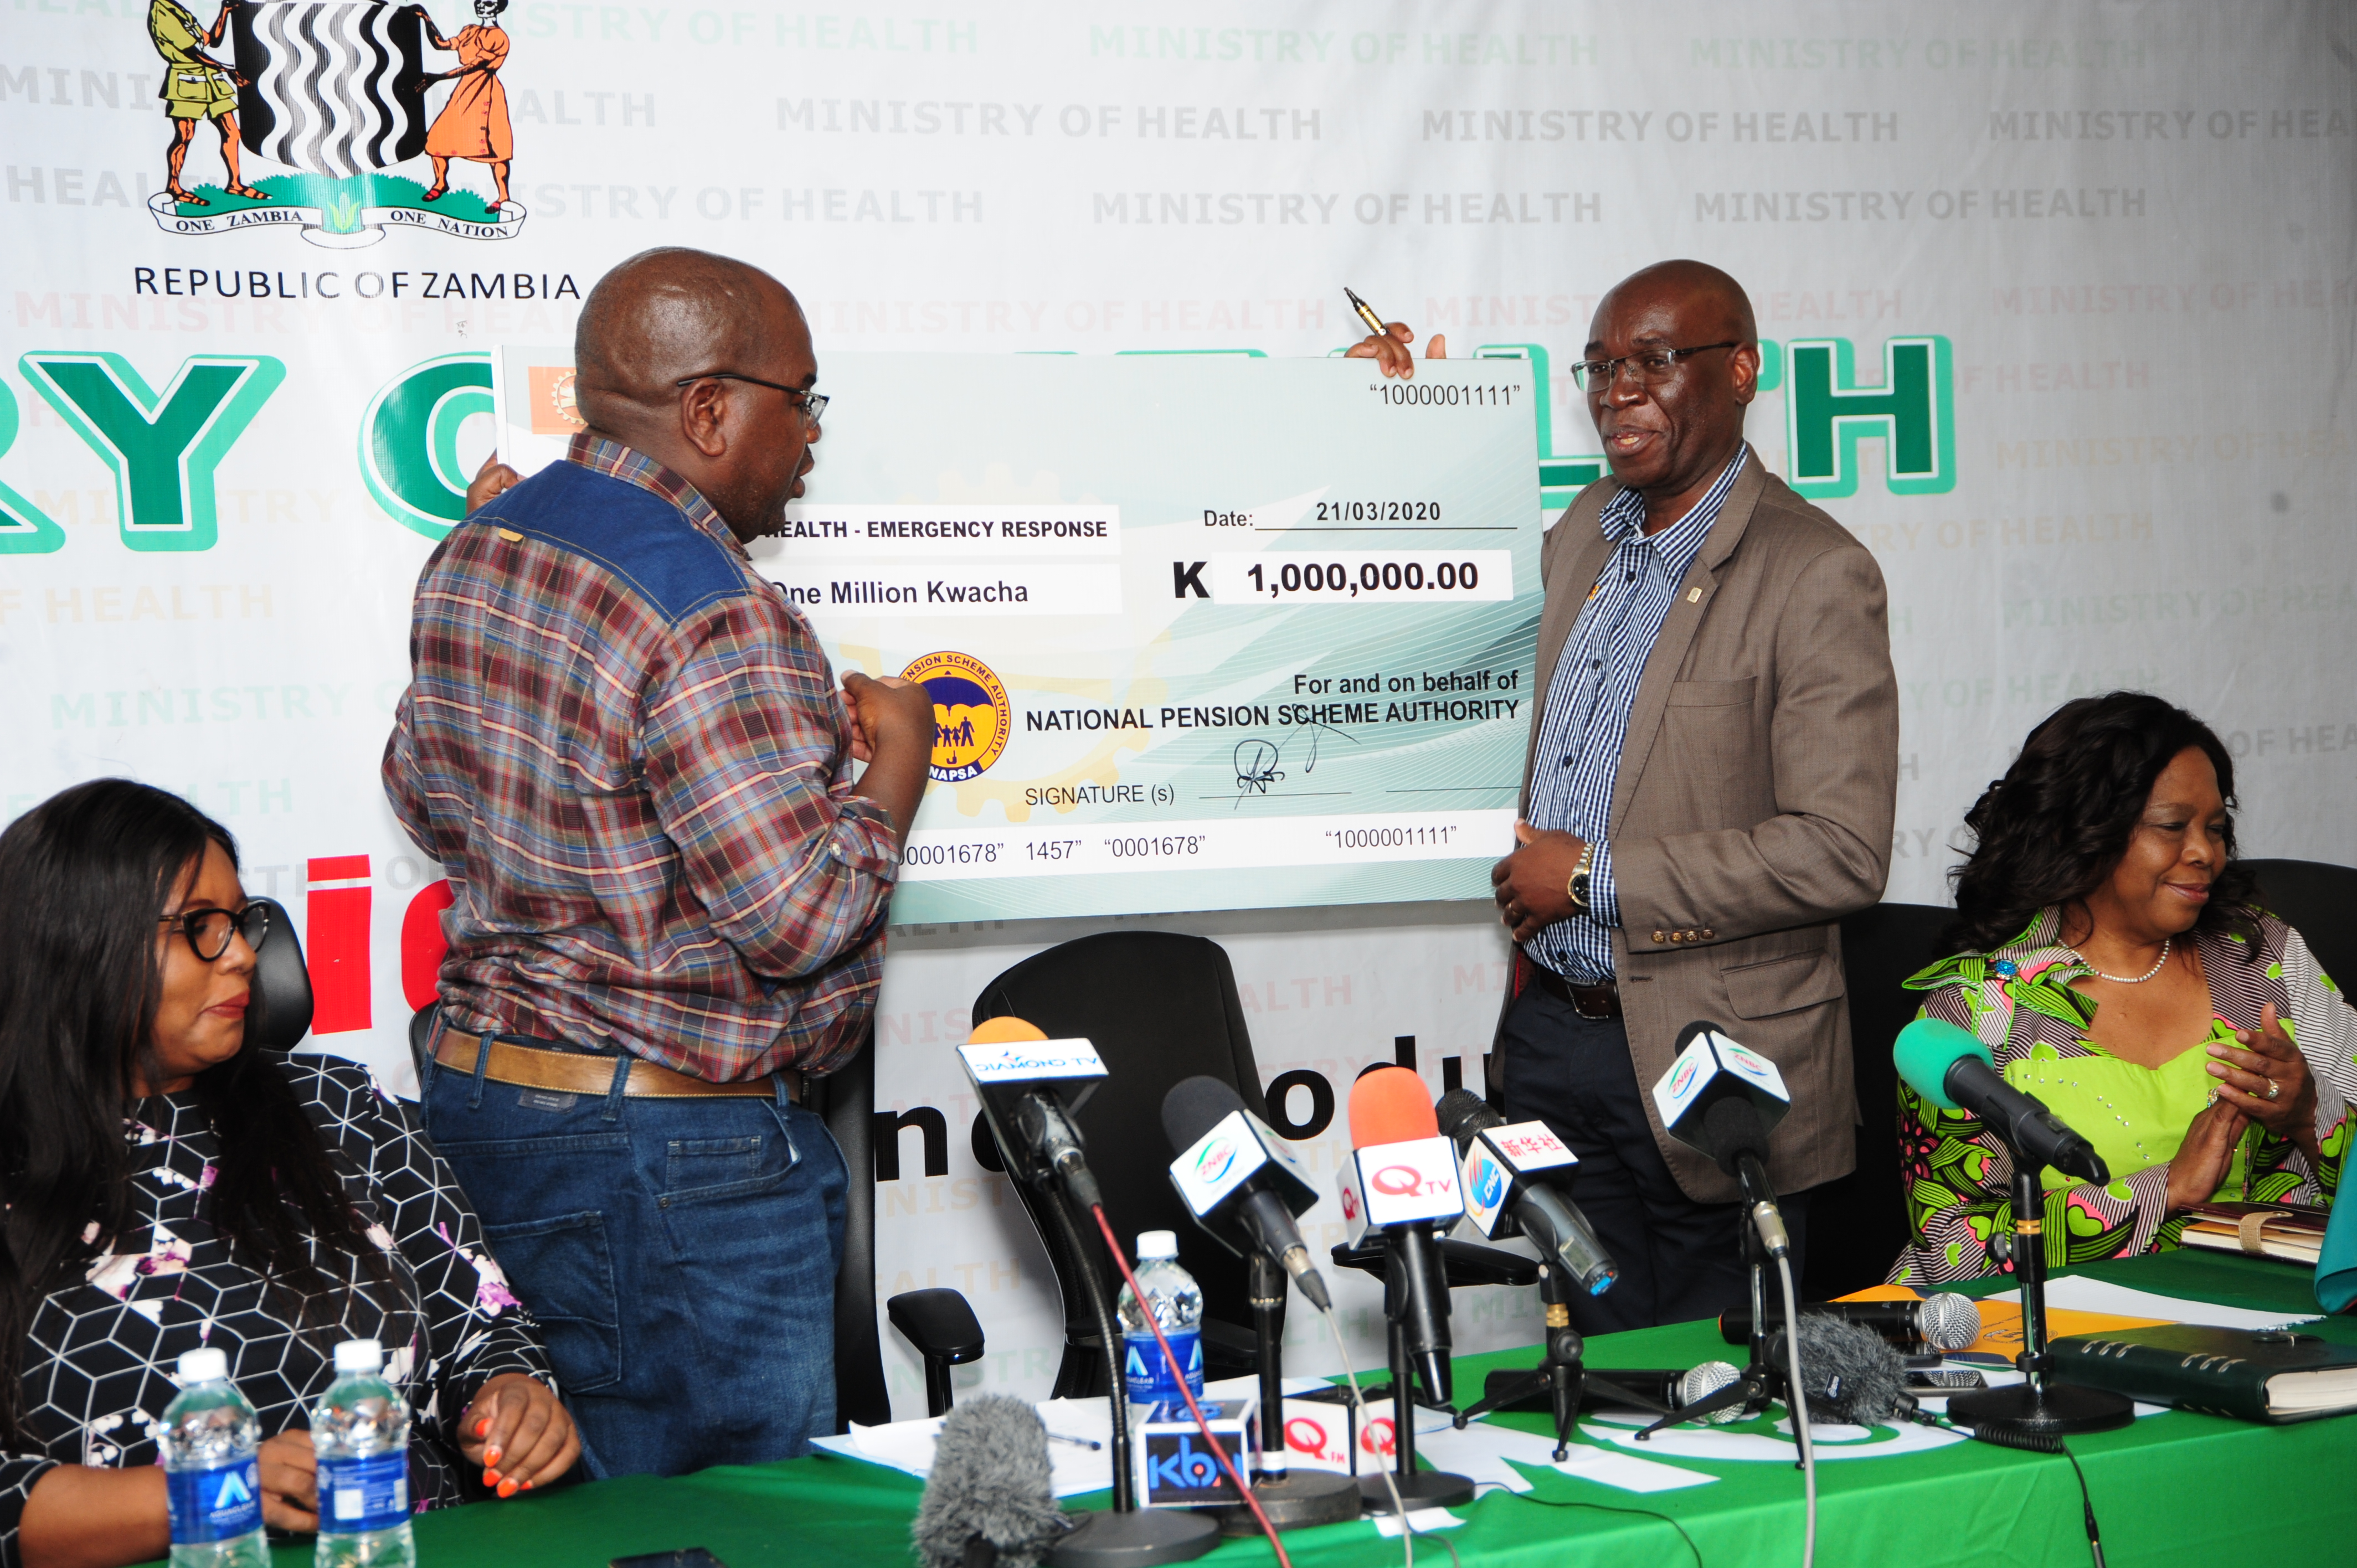 Mr. Yollard Kachinda NAPSA- Director General handing over a cheque donation for the fight against COVID 19